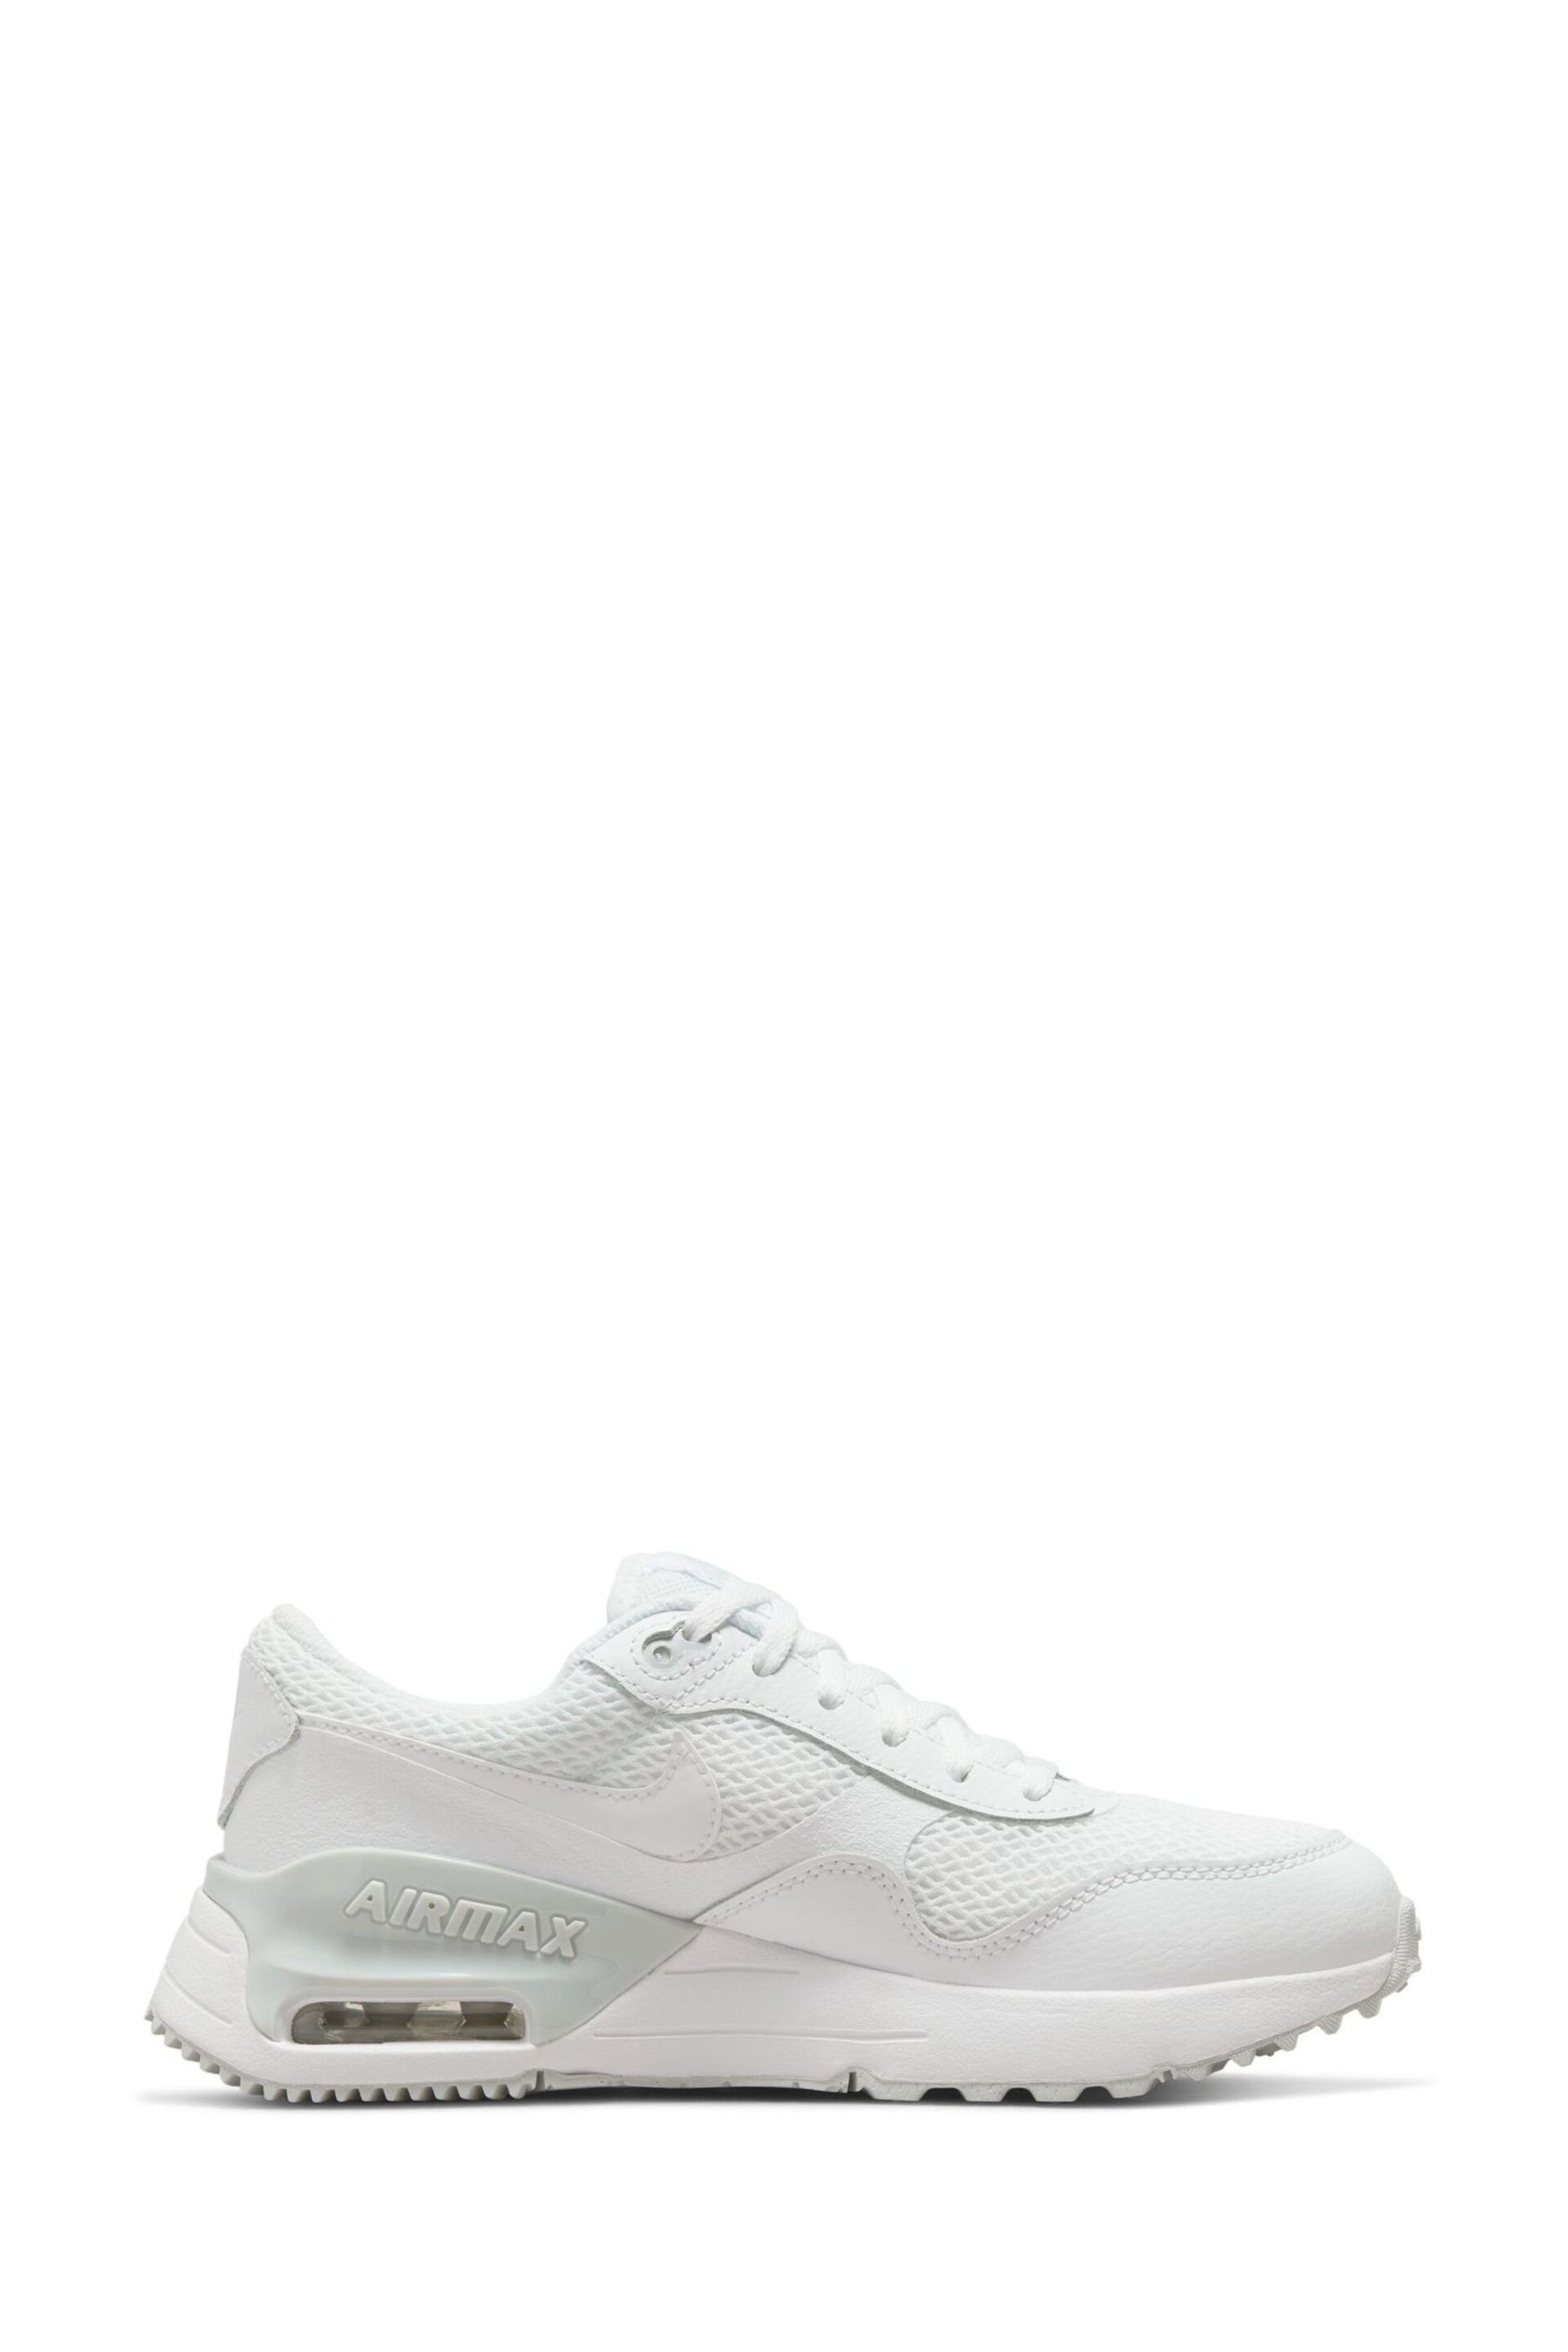 Nike White Youth Air Max SYSTM Trainers - Image 3 of 10